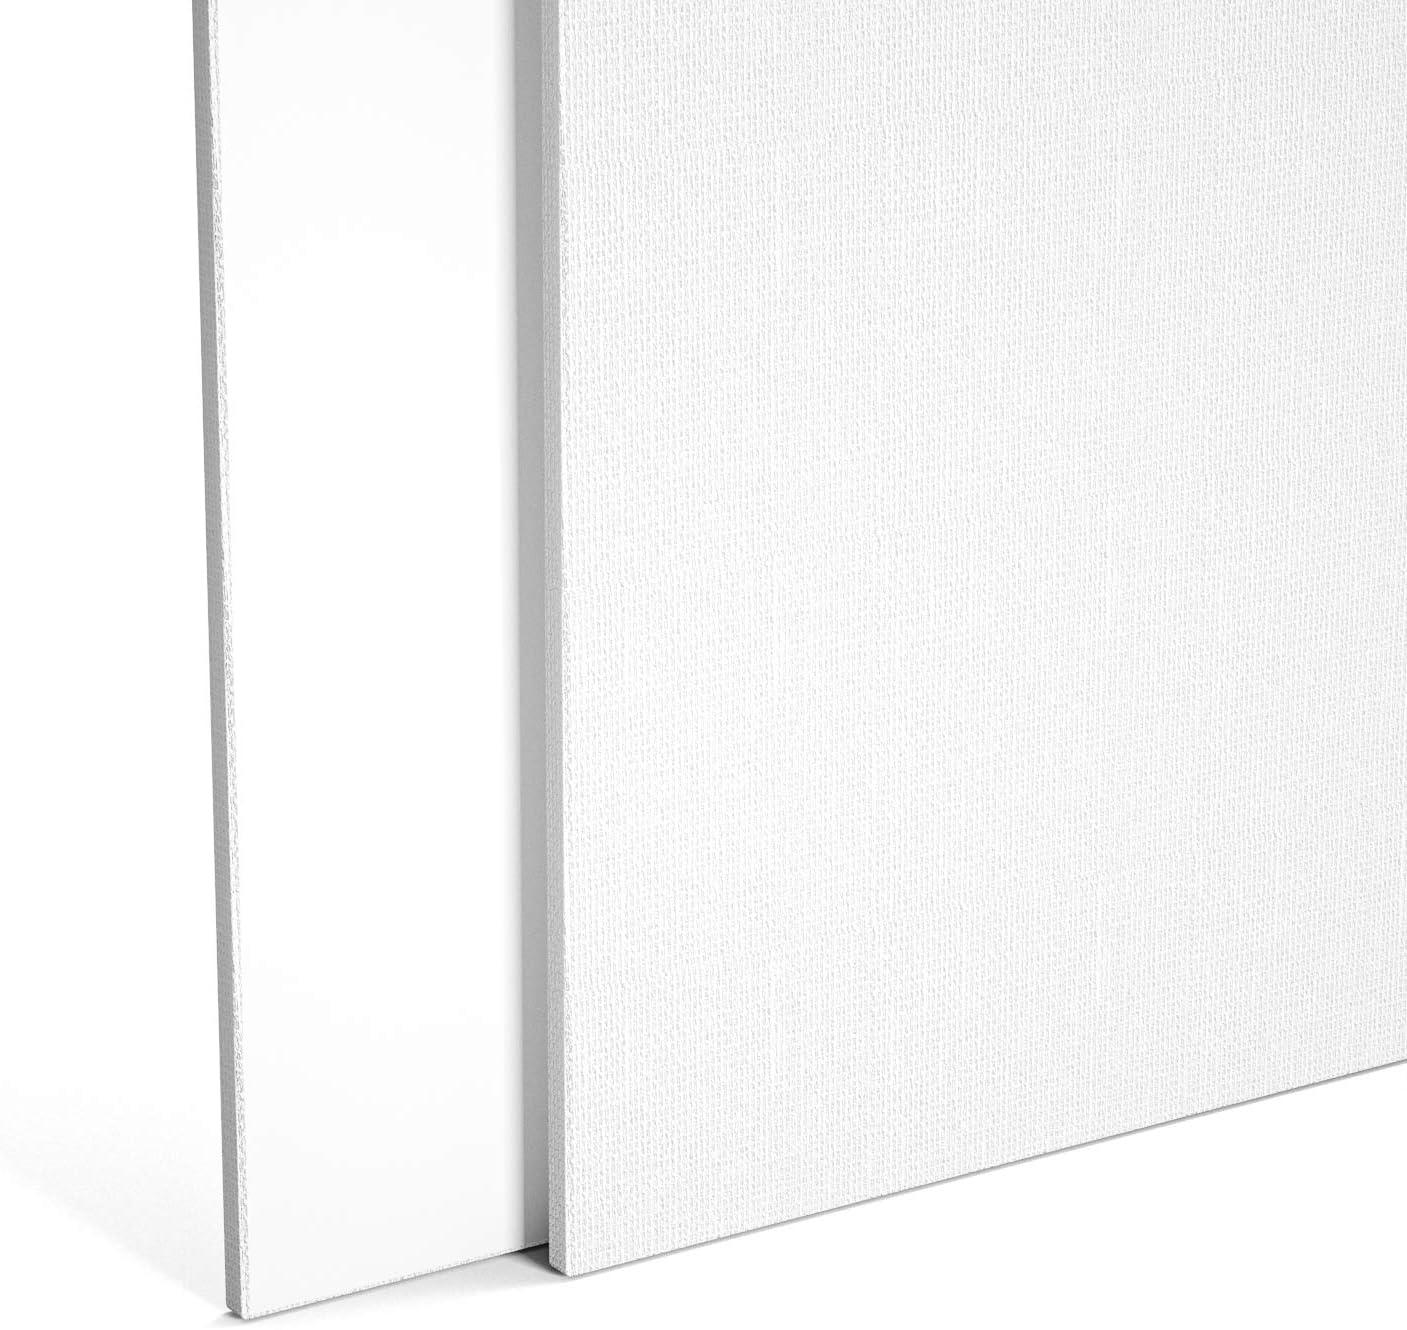 GOTIDEAL Stretched Canvas, Multi Pack 4x4 inch, 5x7 inch, 8x10 inch,9x12 inch, 11x14 inch Set of 10, Primed White - 100% Cotton Artist Canvas Boards